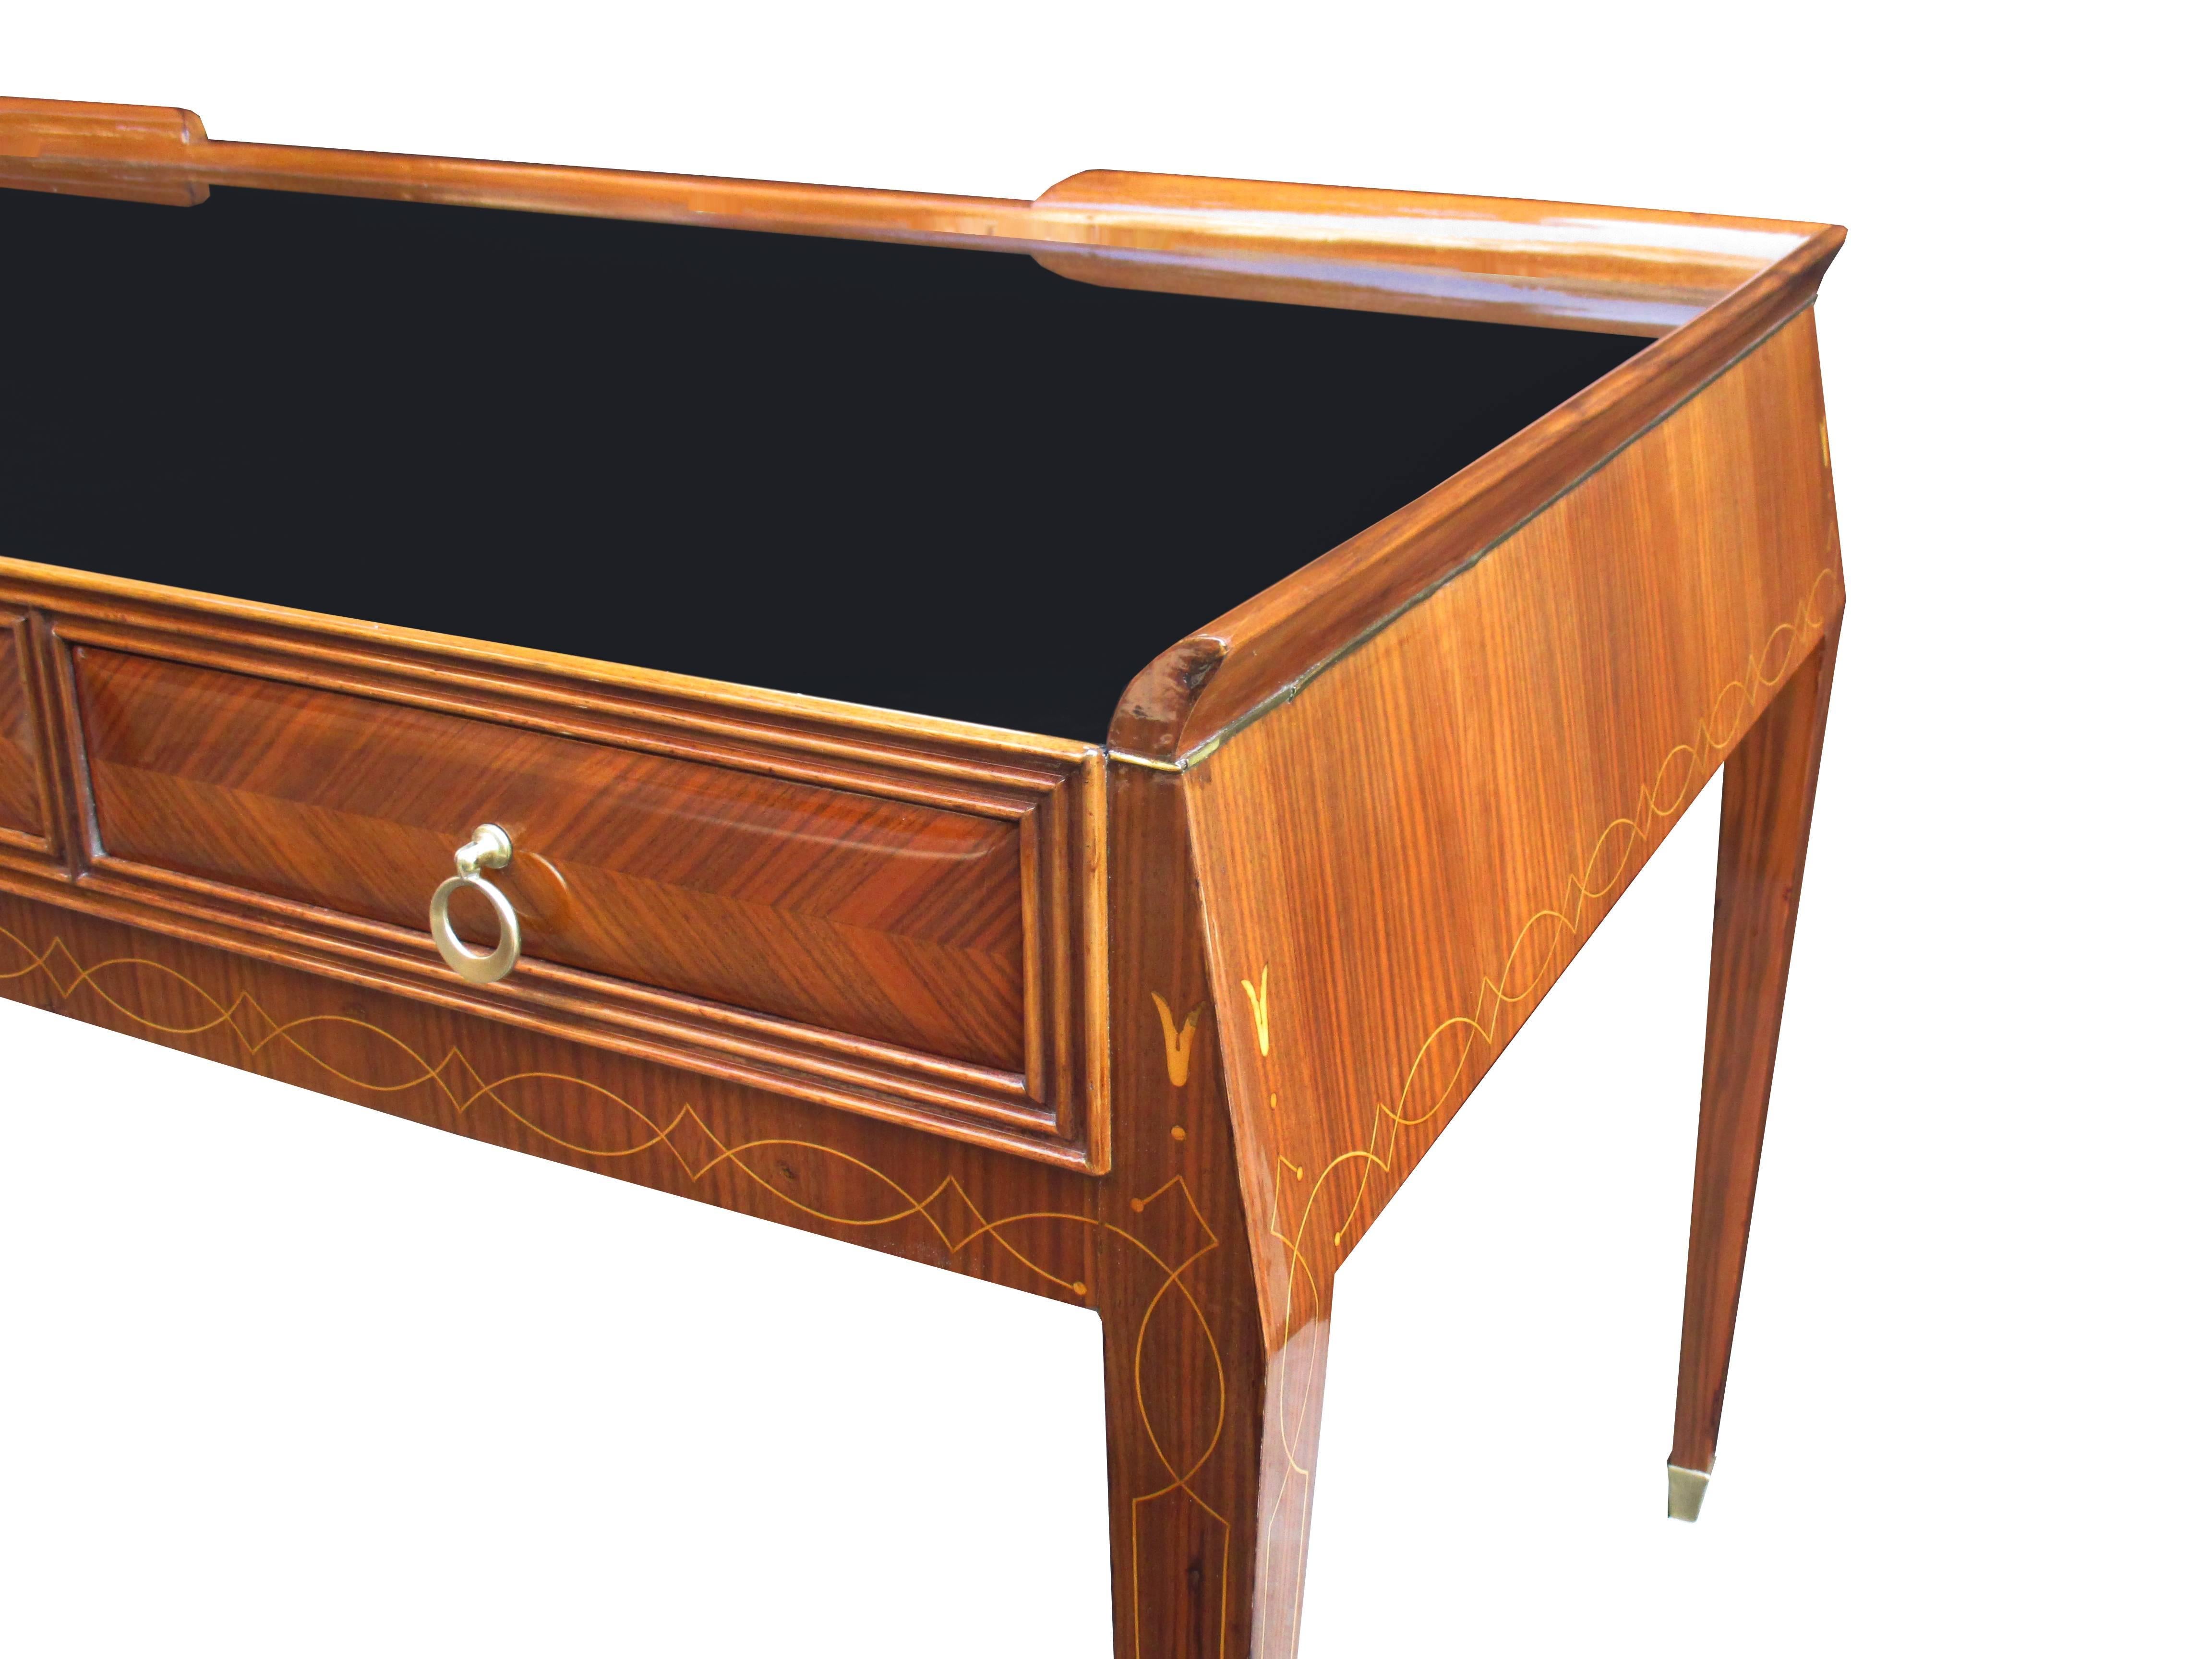 A fine modernist desk with glass top
designed by Paolo Buffa. Palisander with marquetry patterned drawer fronts, 
fruitwood inlays and patinated bronze pulls and sabots. Featuring a black glass writing surface.